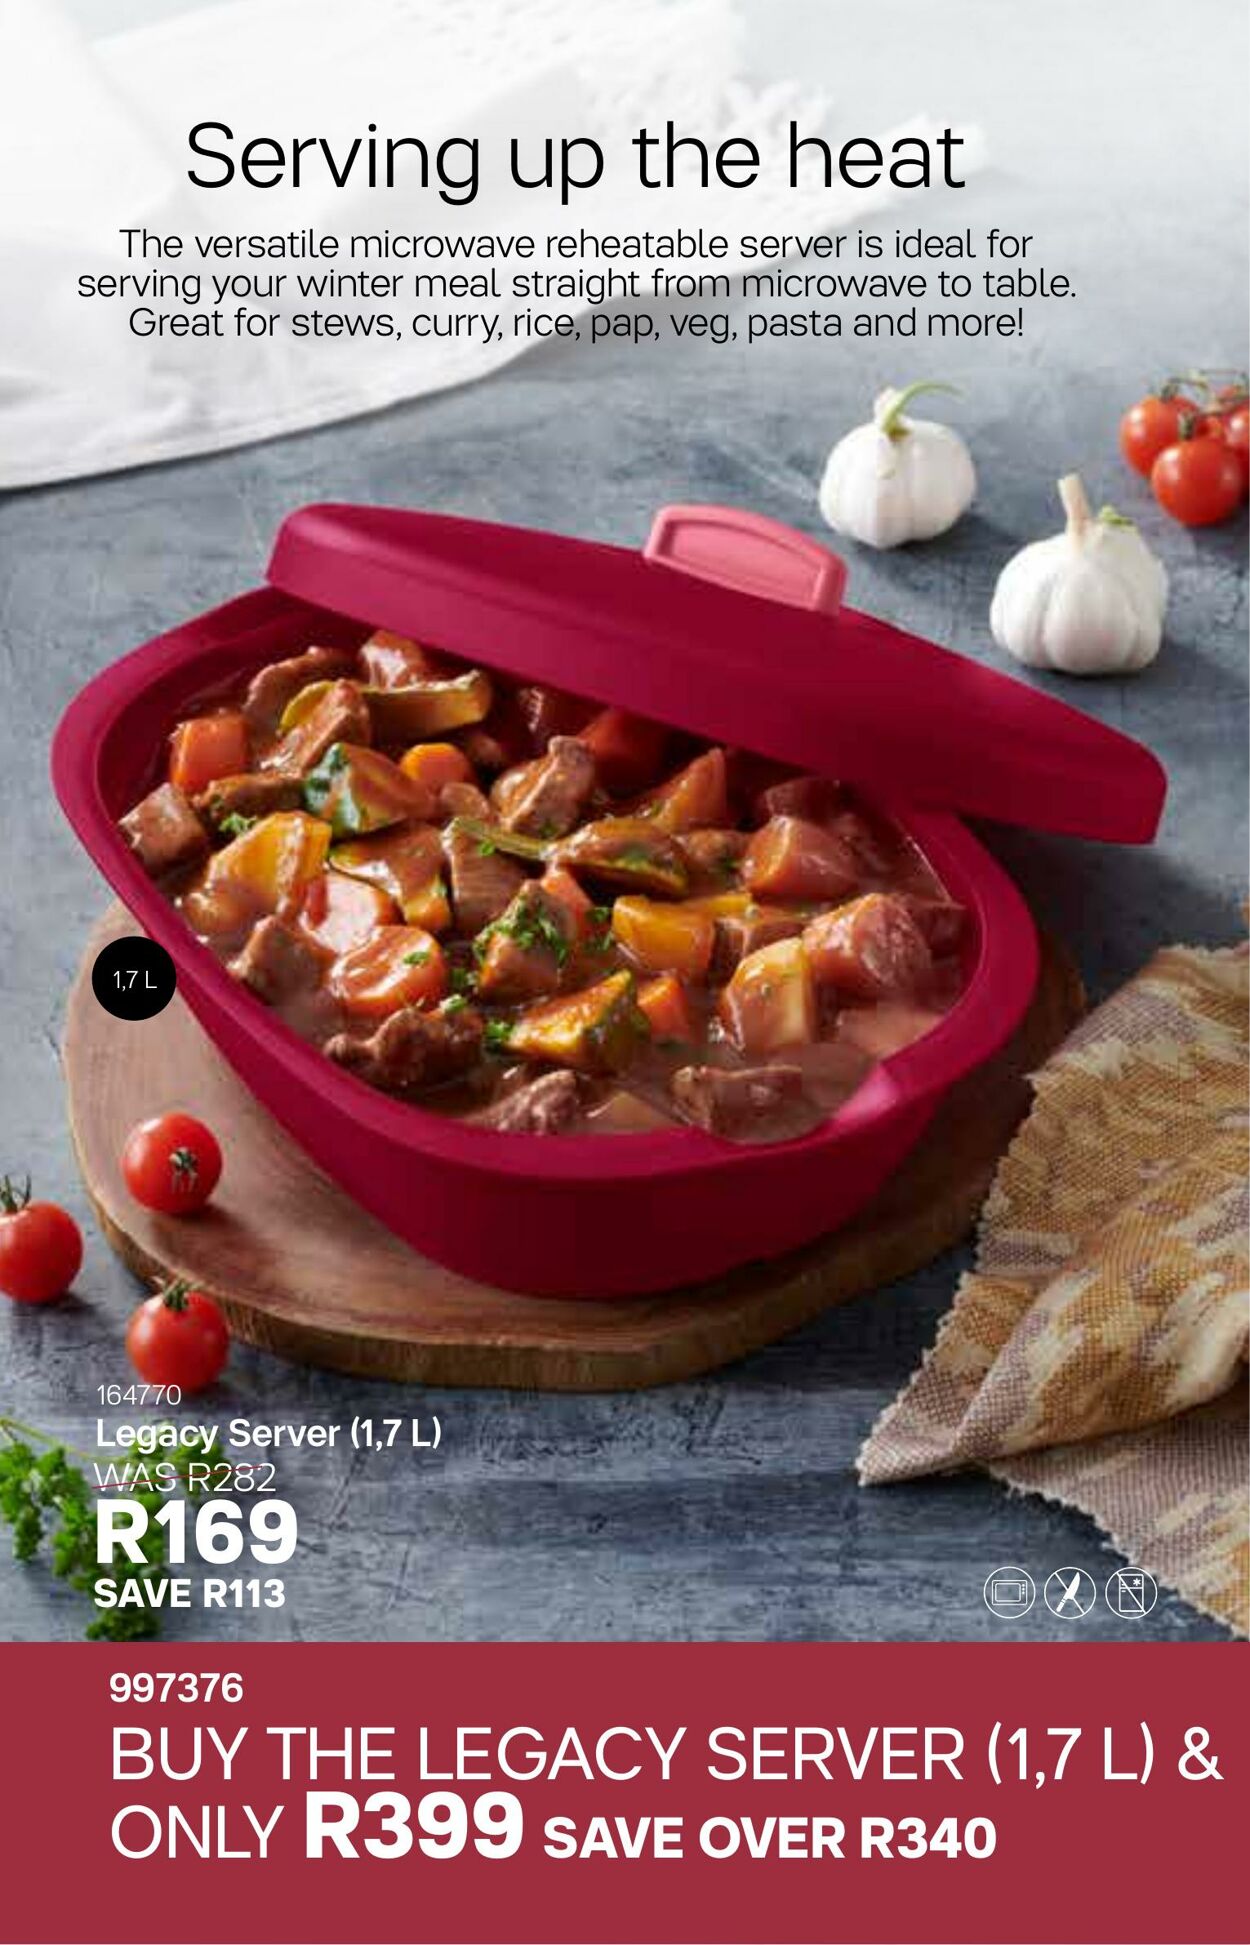 https://static.za-specials.com/images/promotions/tupperware/winter-warmers-rsa-4511893e29/51180cac8fc6.jpg